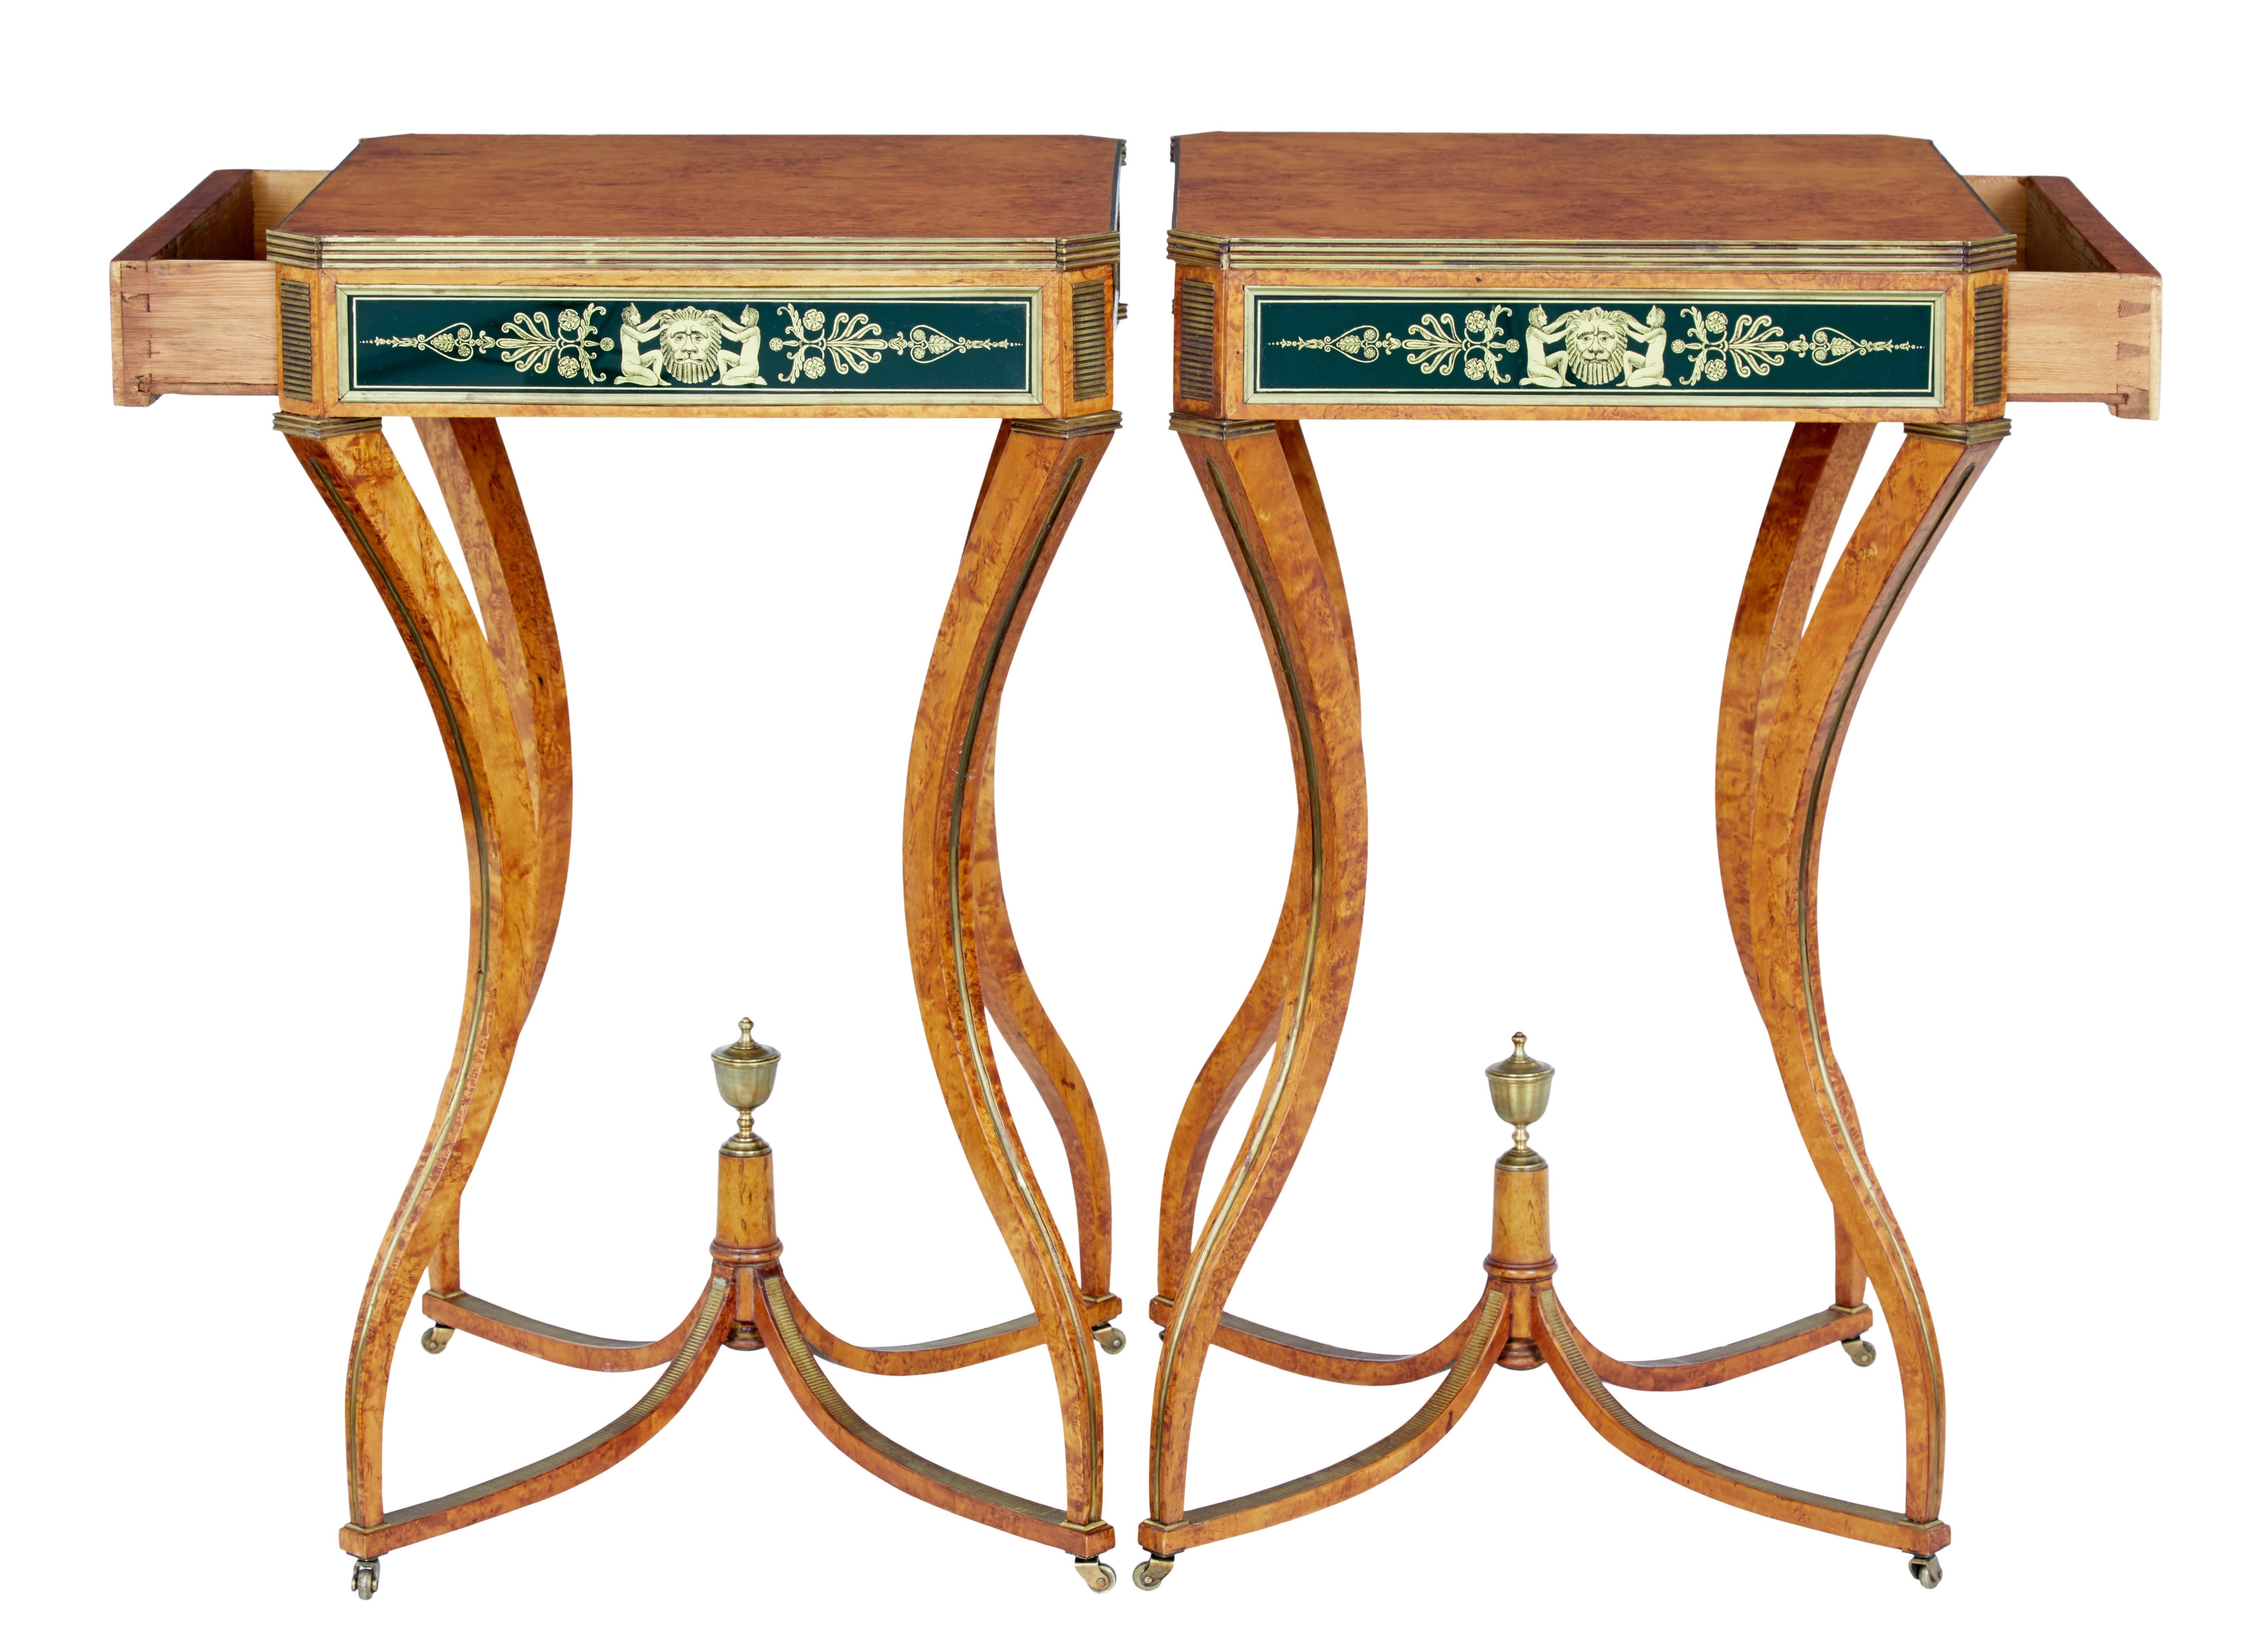 Empire Revival Pair of 19th Century Burr Birch Russian Occasional Tables